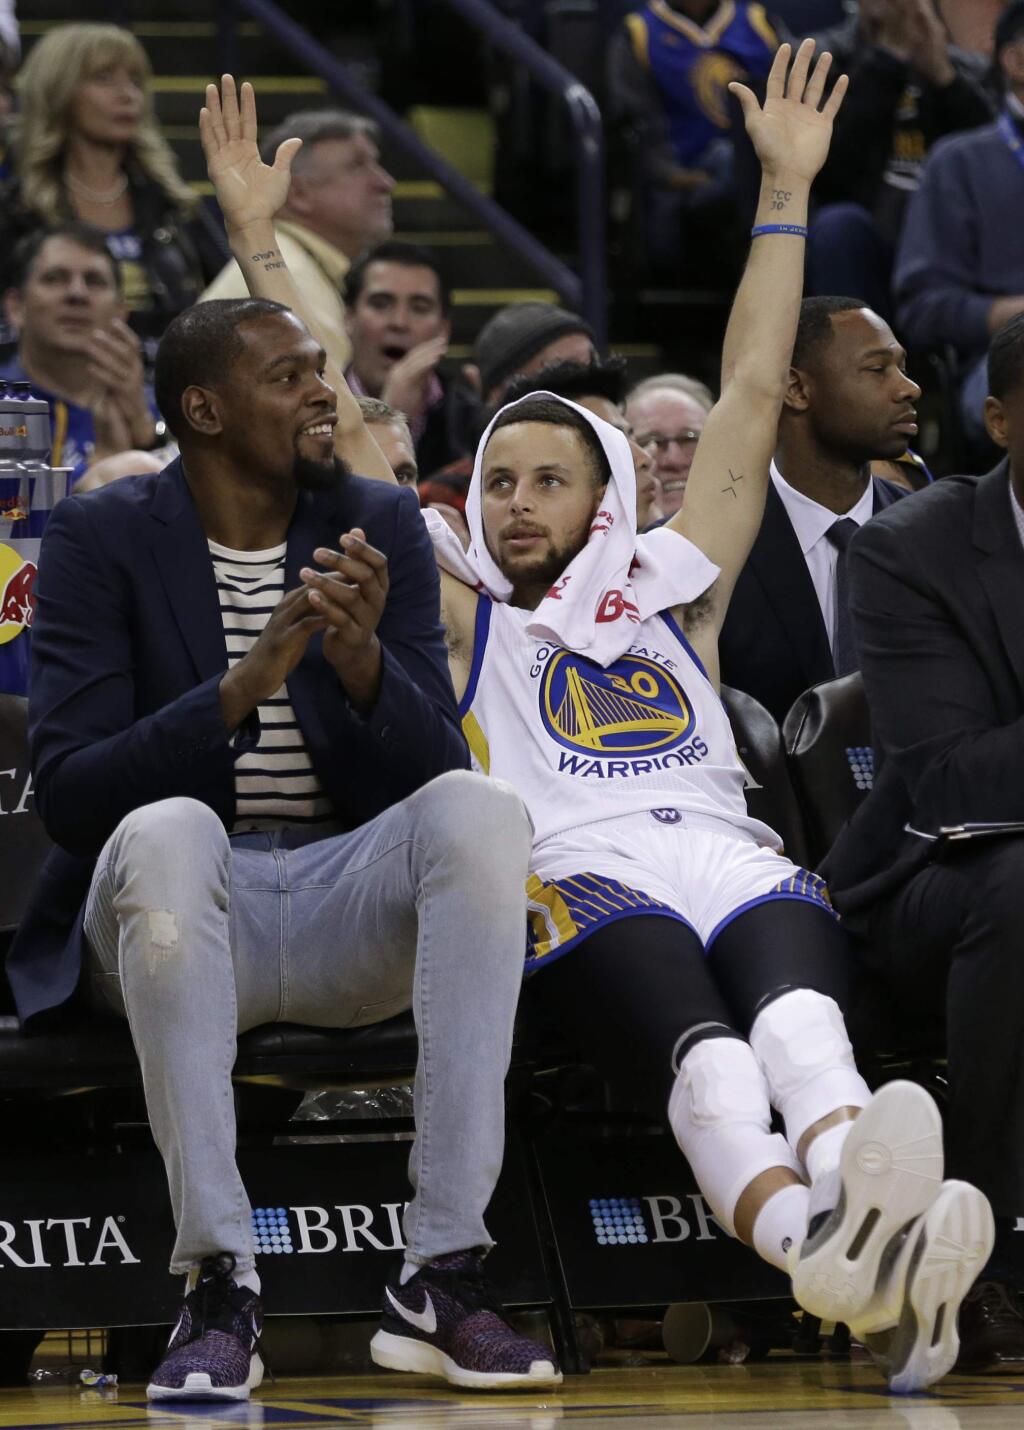 Golden State Warriors' Kevin Durant, left, and Stephen Curry celebrate a score against the Sacramento Kings during the second half Friday, March 24, 2017, in Oakland. (AP Photo/Ben Margot)